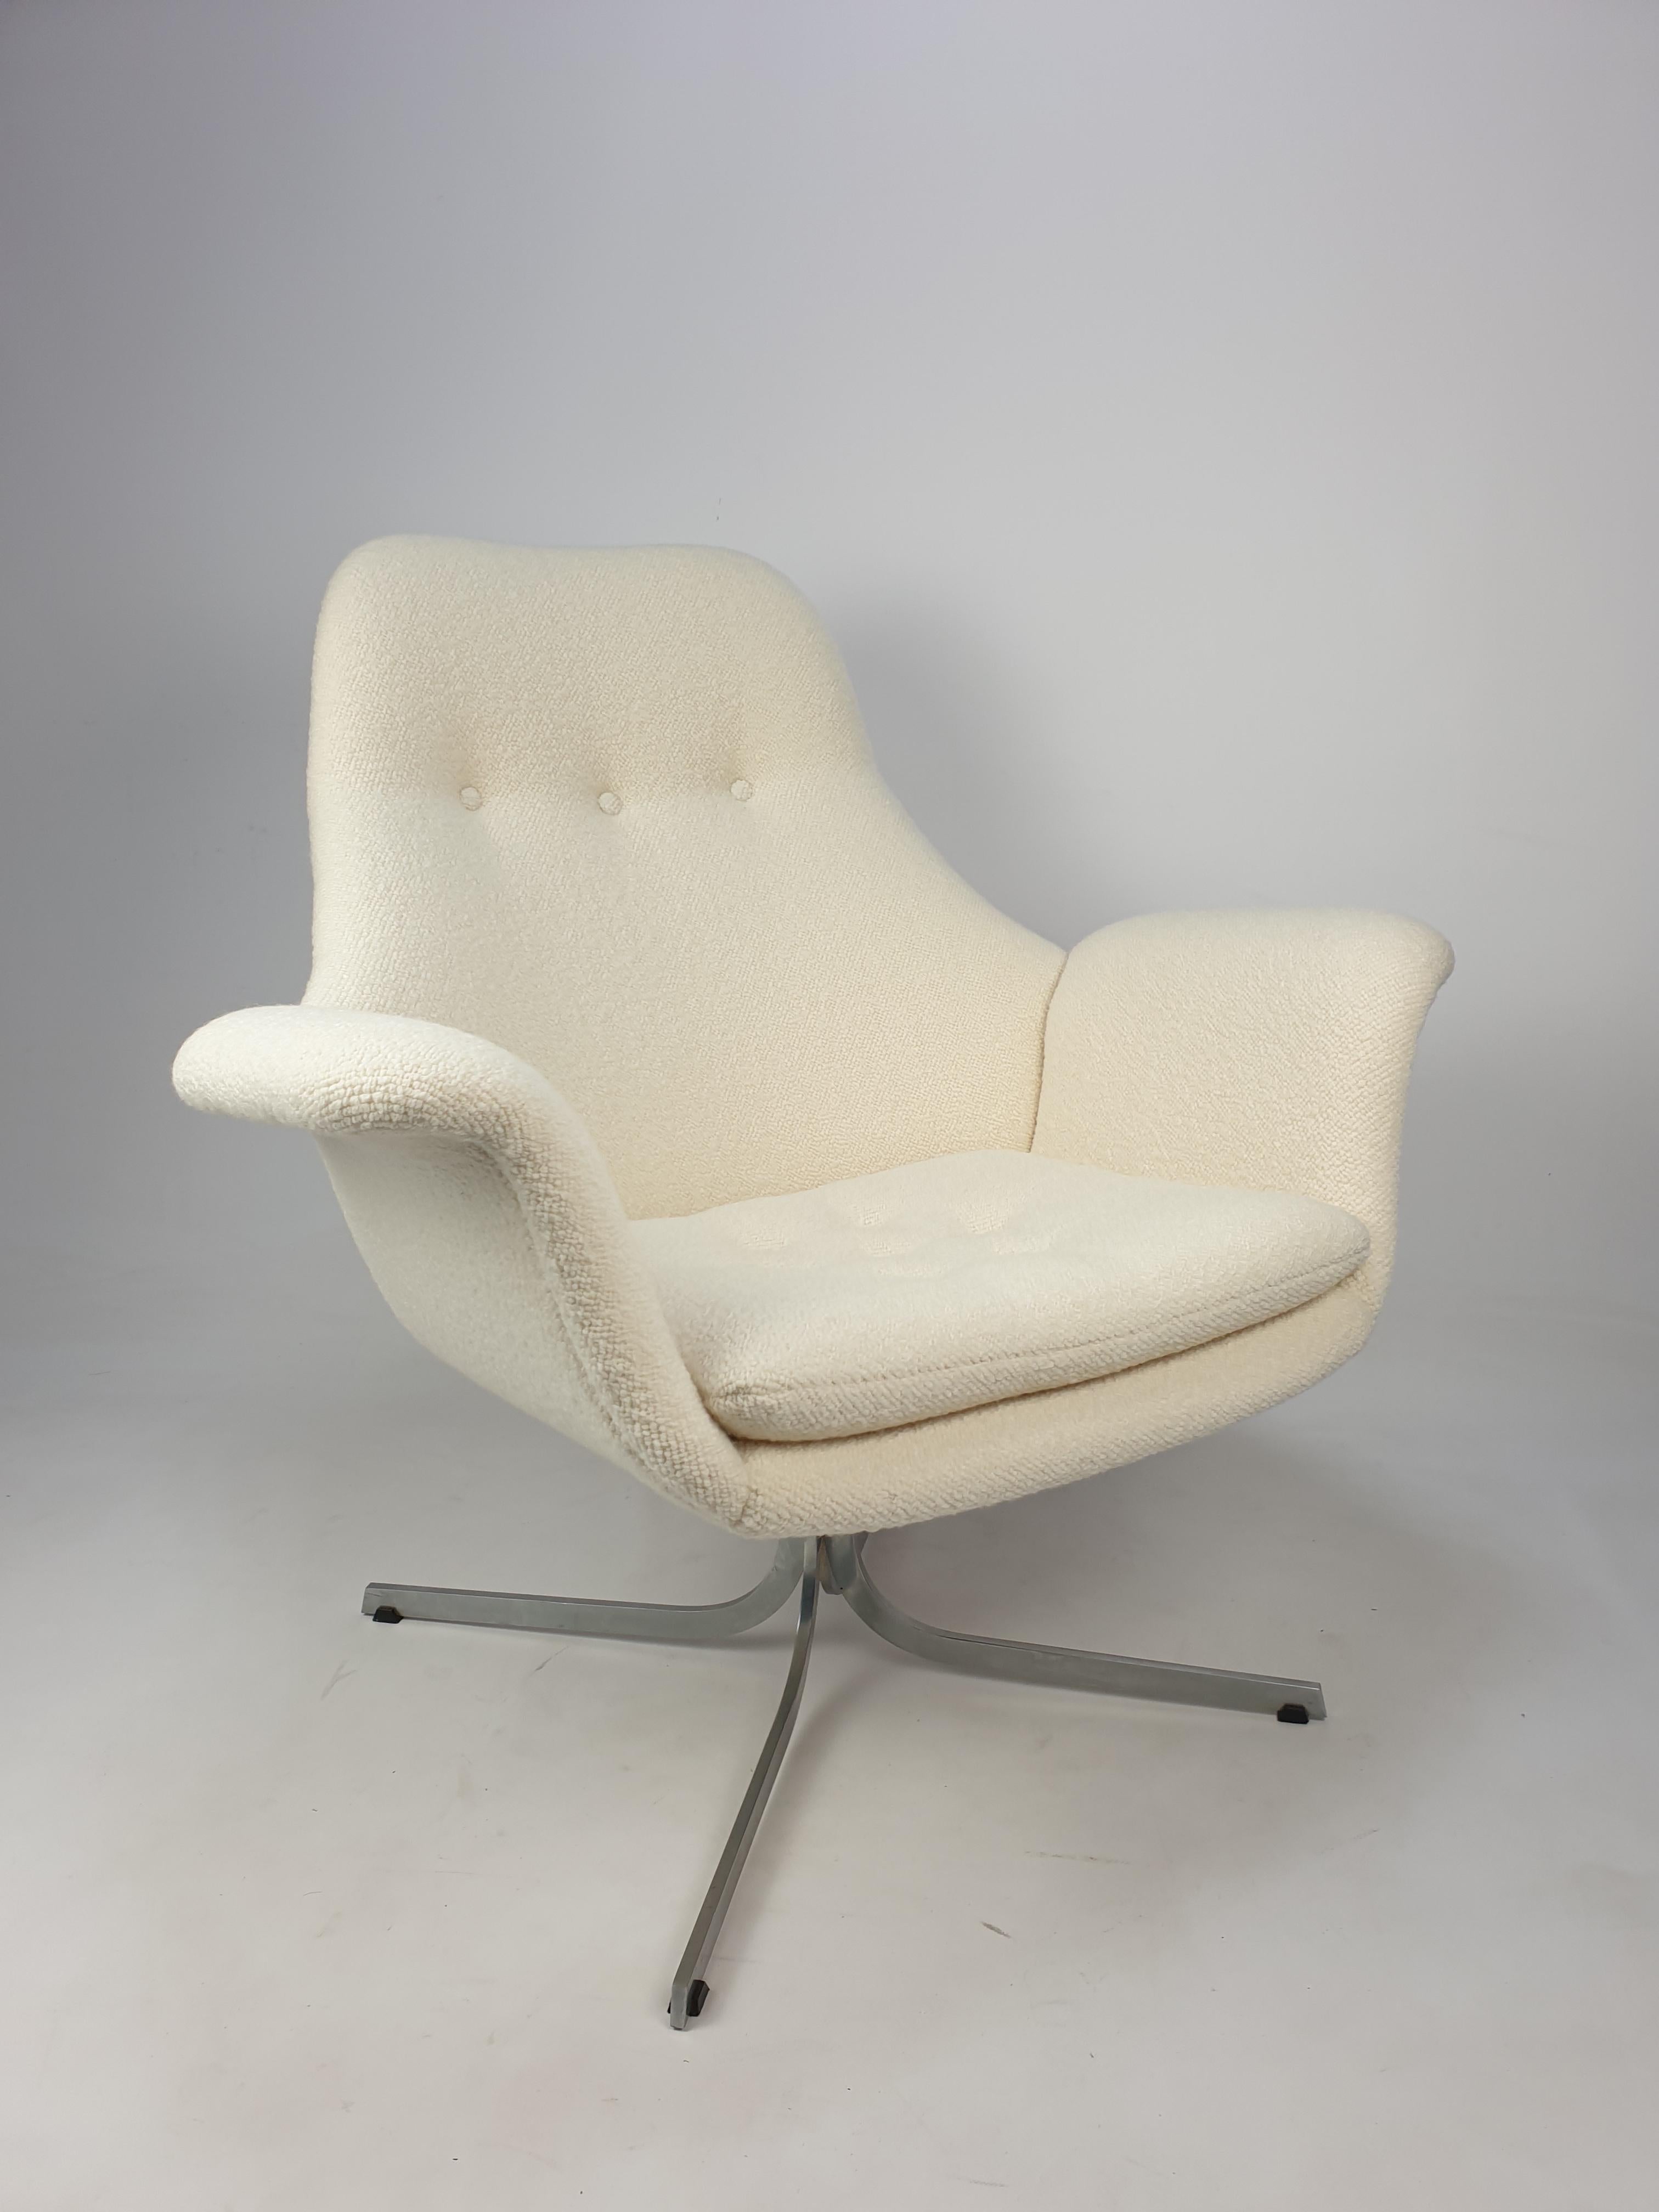 Extremely rare big tulip lounge chair, designed by Pierre Paulin for Artifort in 1960's. This comfortable chair is a not common but original Pierre Paulin model. It is completely restored by a Pierre Paulin specialist, he studied the original